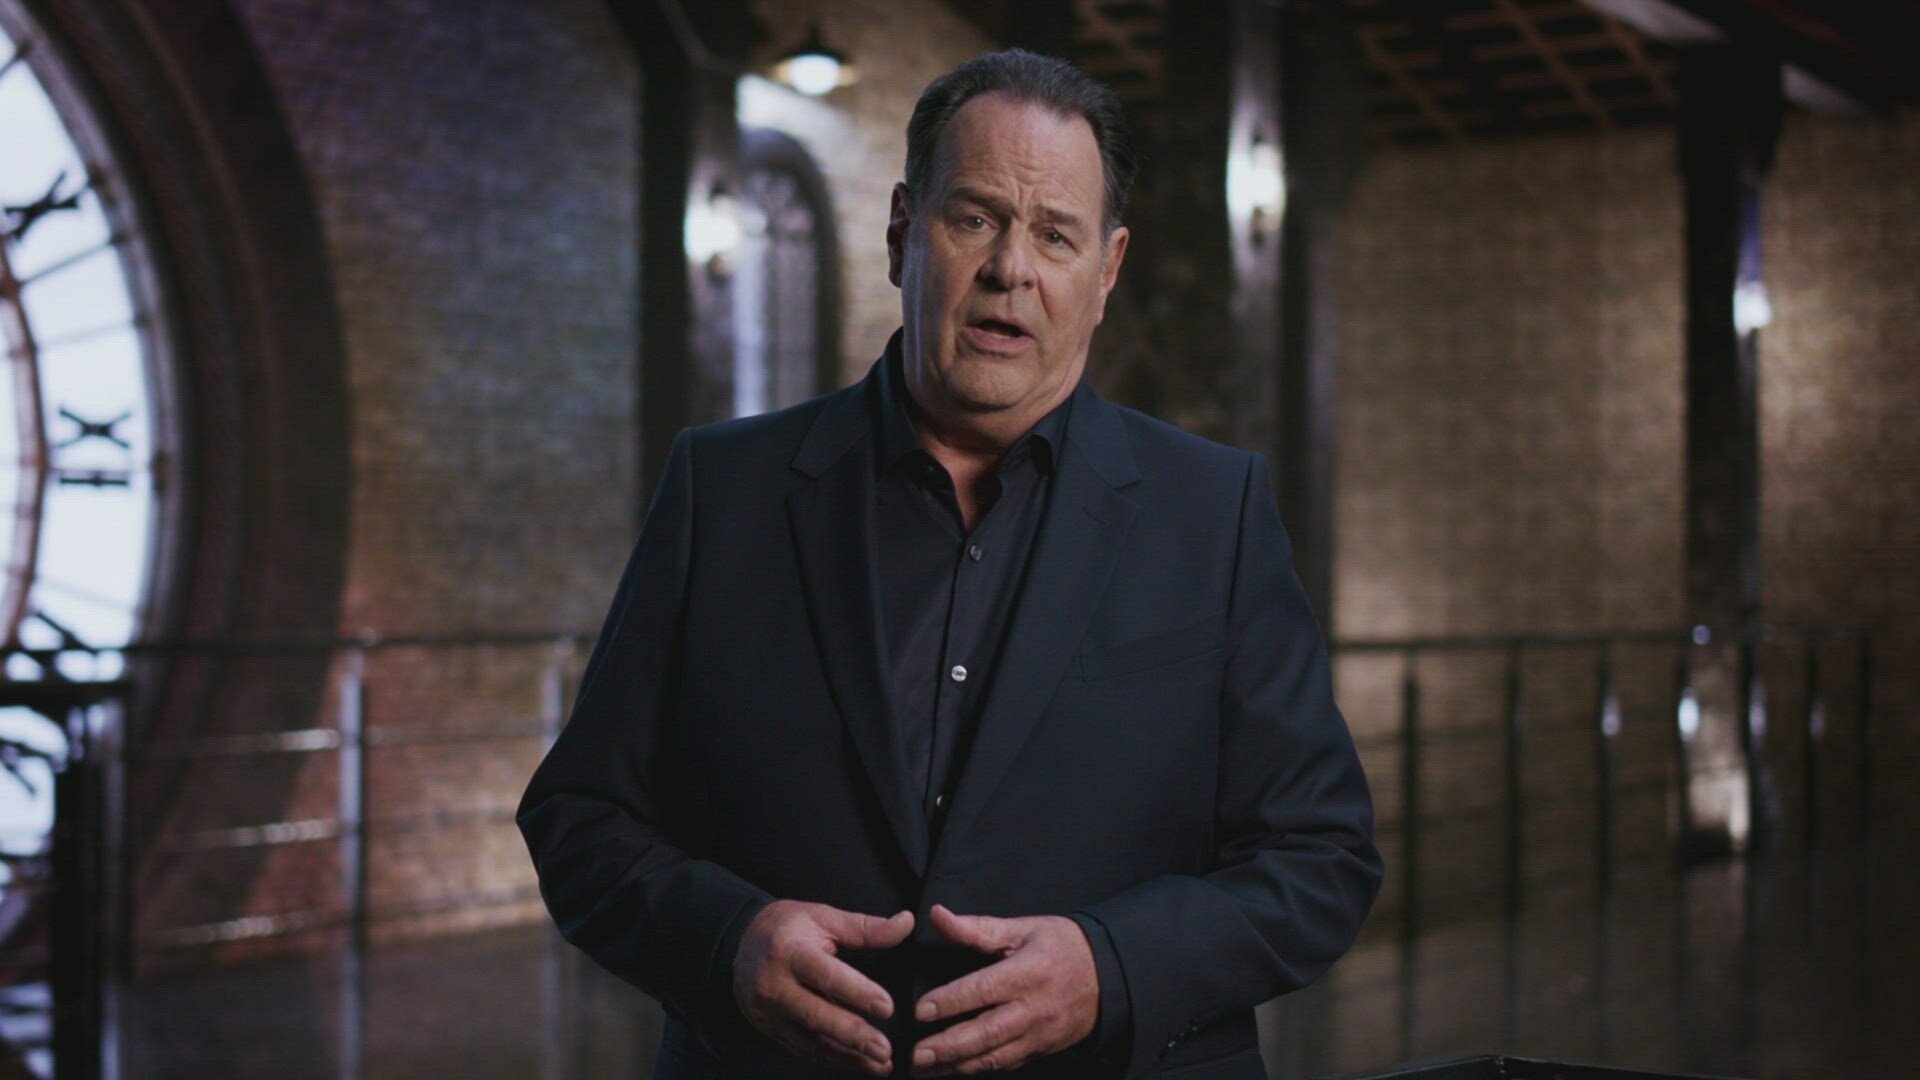 The UnBelievable with Dan Akroyd - S1E10